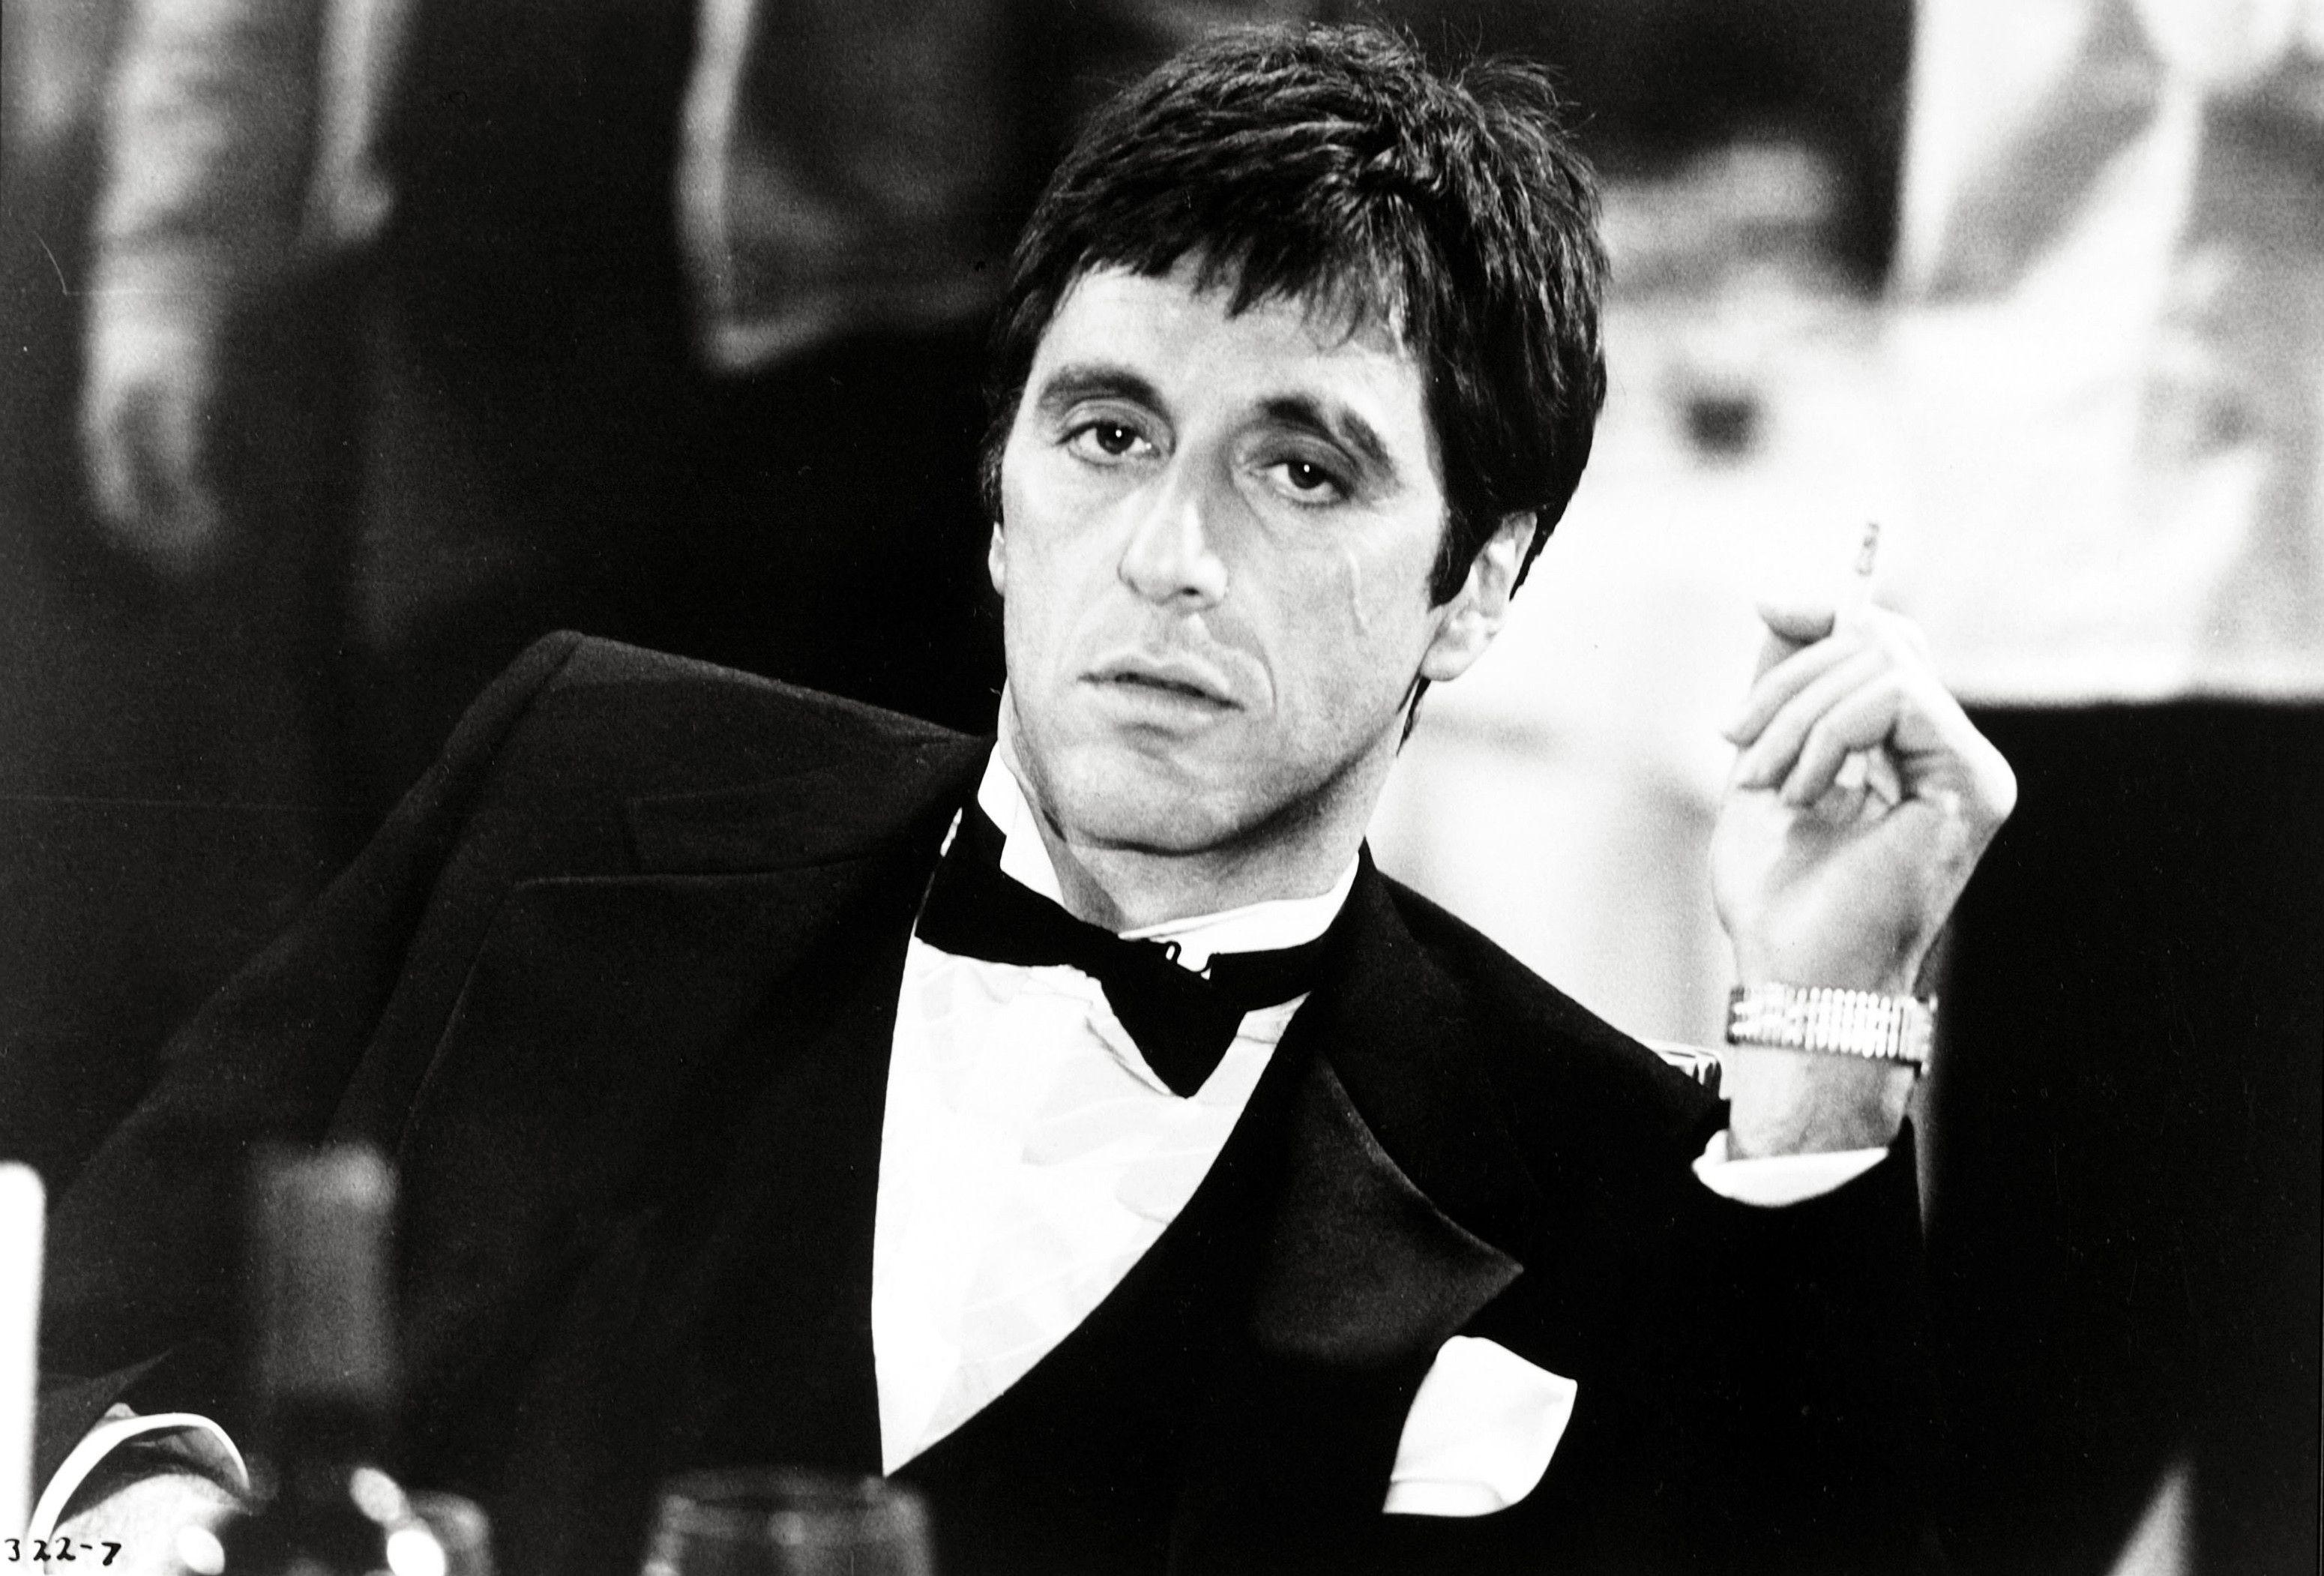 Scarface Wallpaper, Scarface Movie Wallpaper